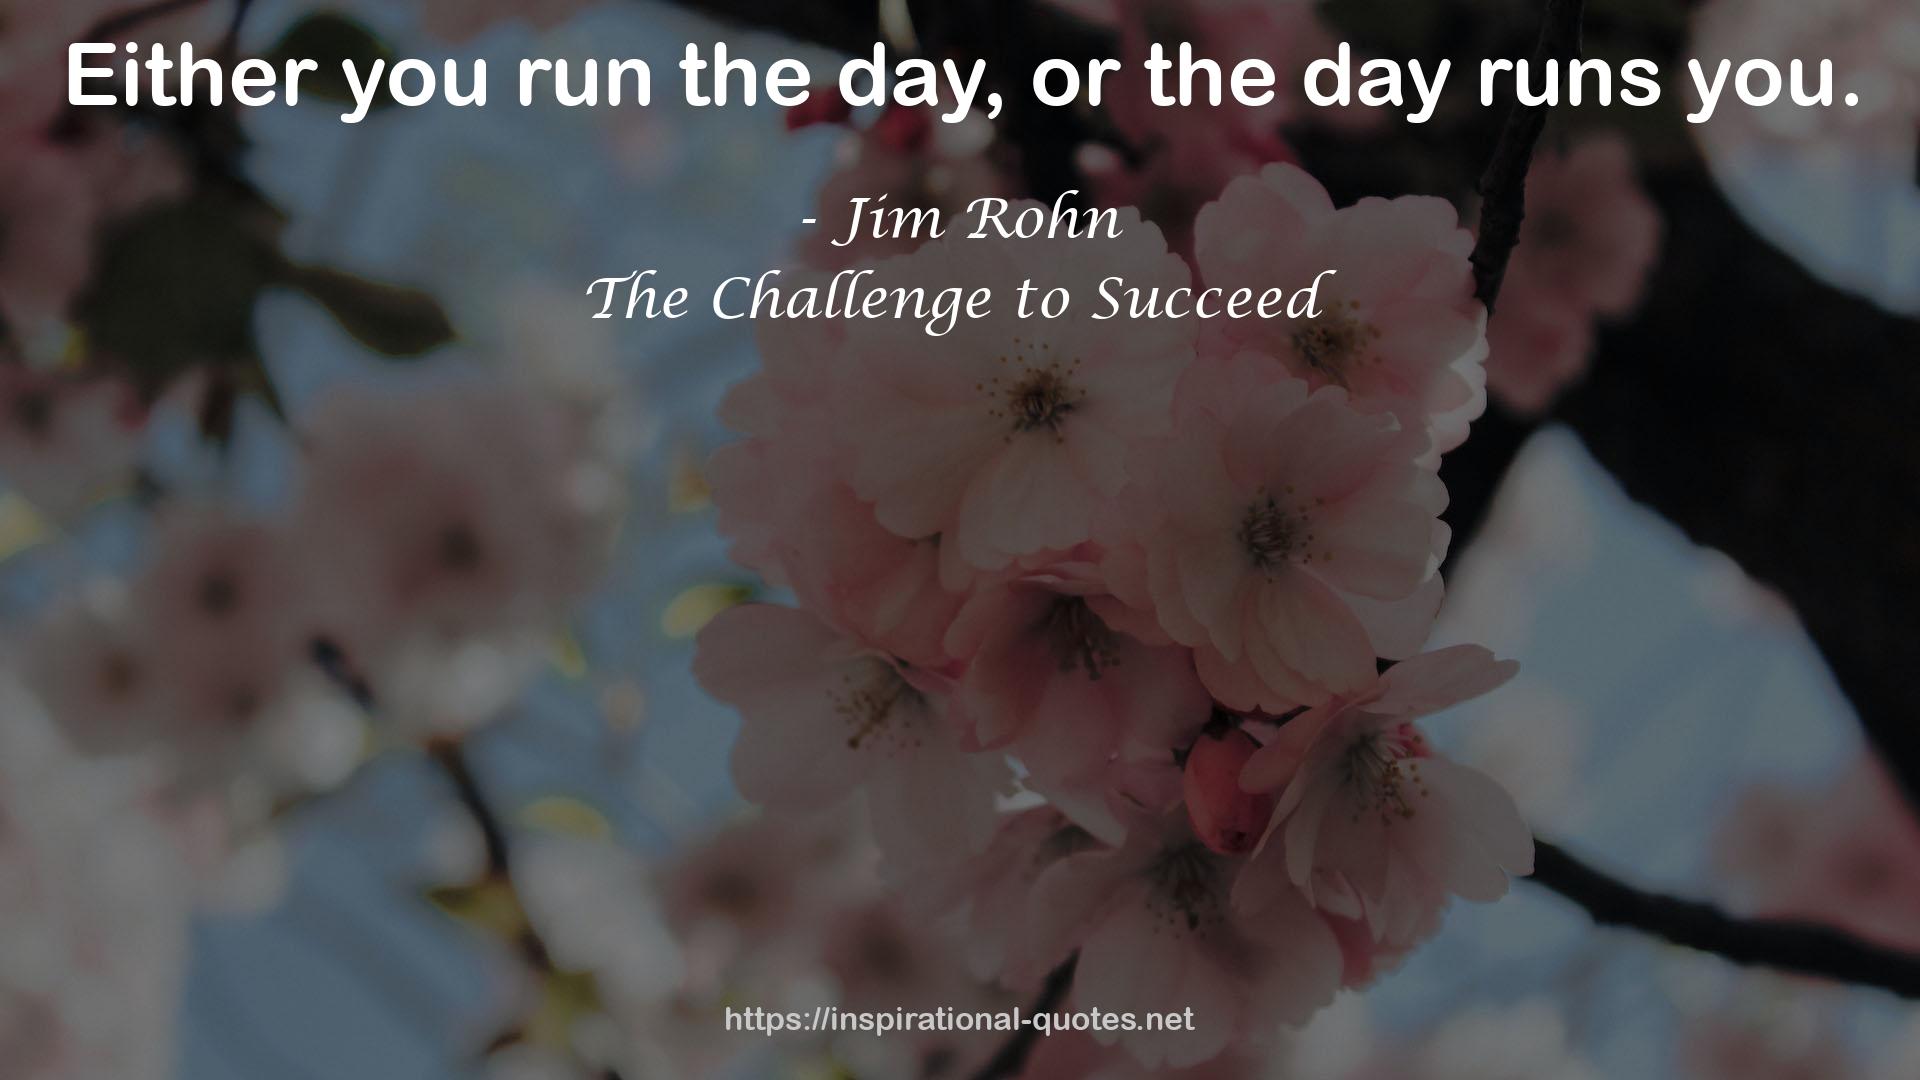 The Challenge to Succeed QUOTES